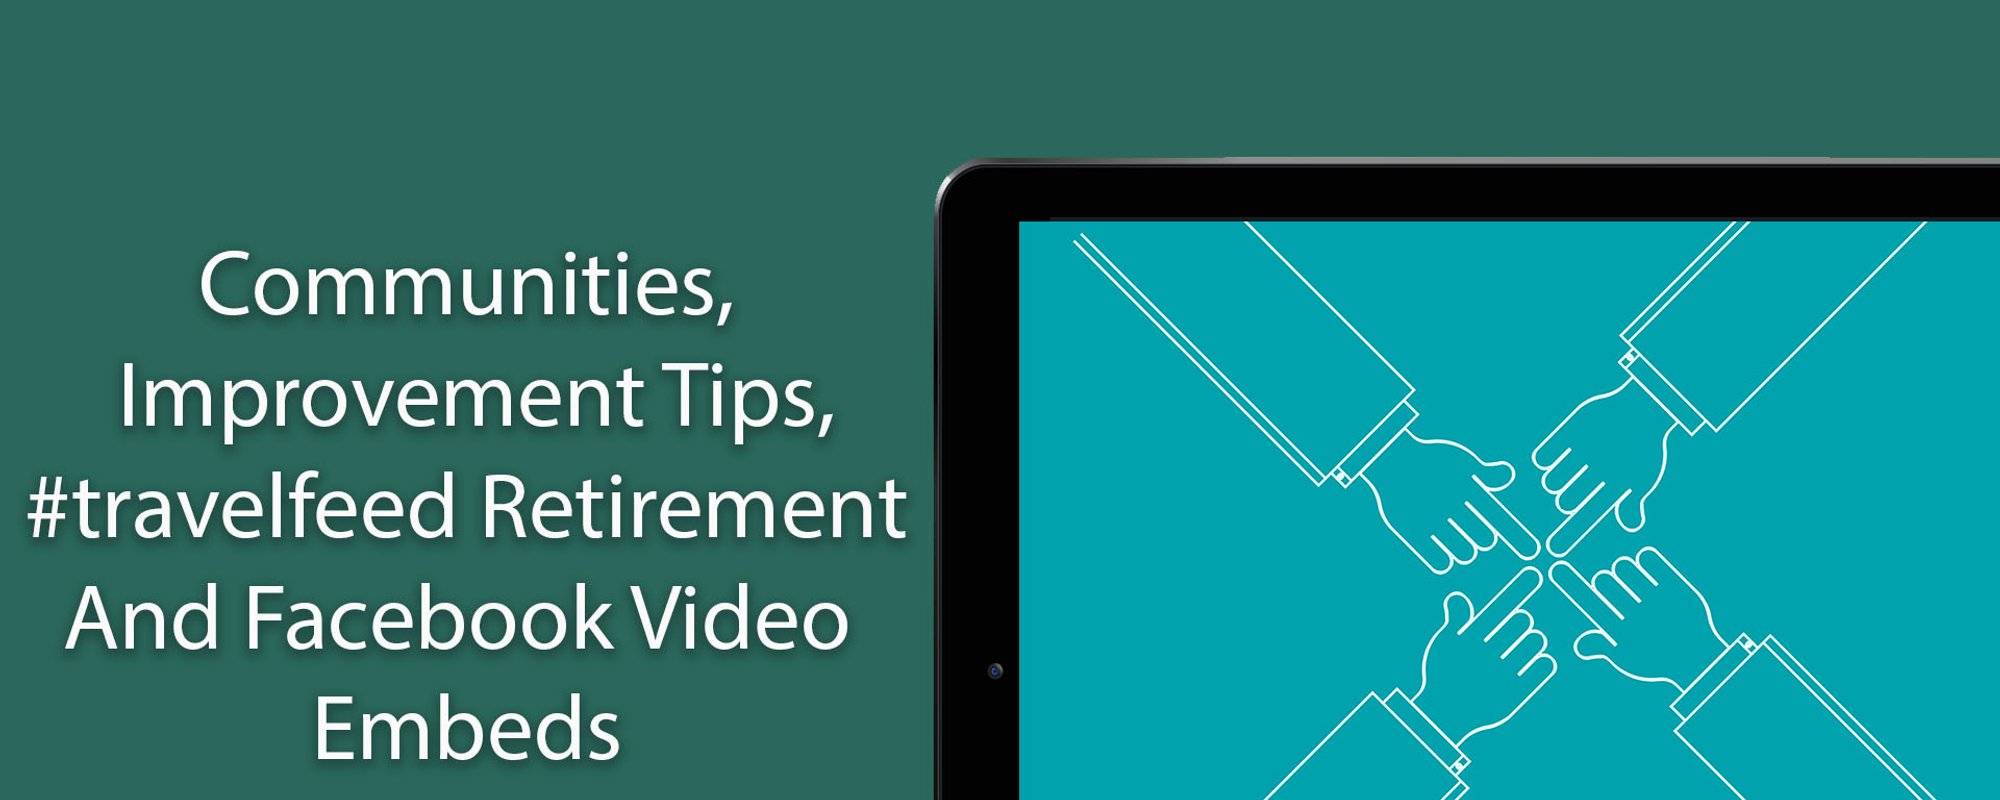 Communities, Improvement Tips, #travelfeed Retirement And Facebook Video Embeds